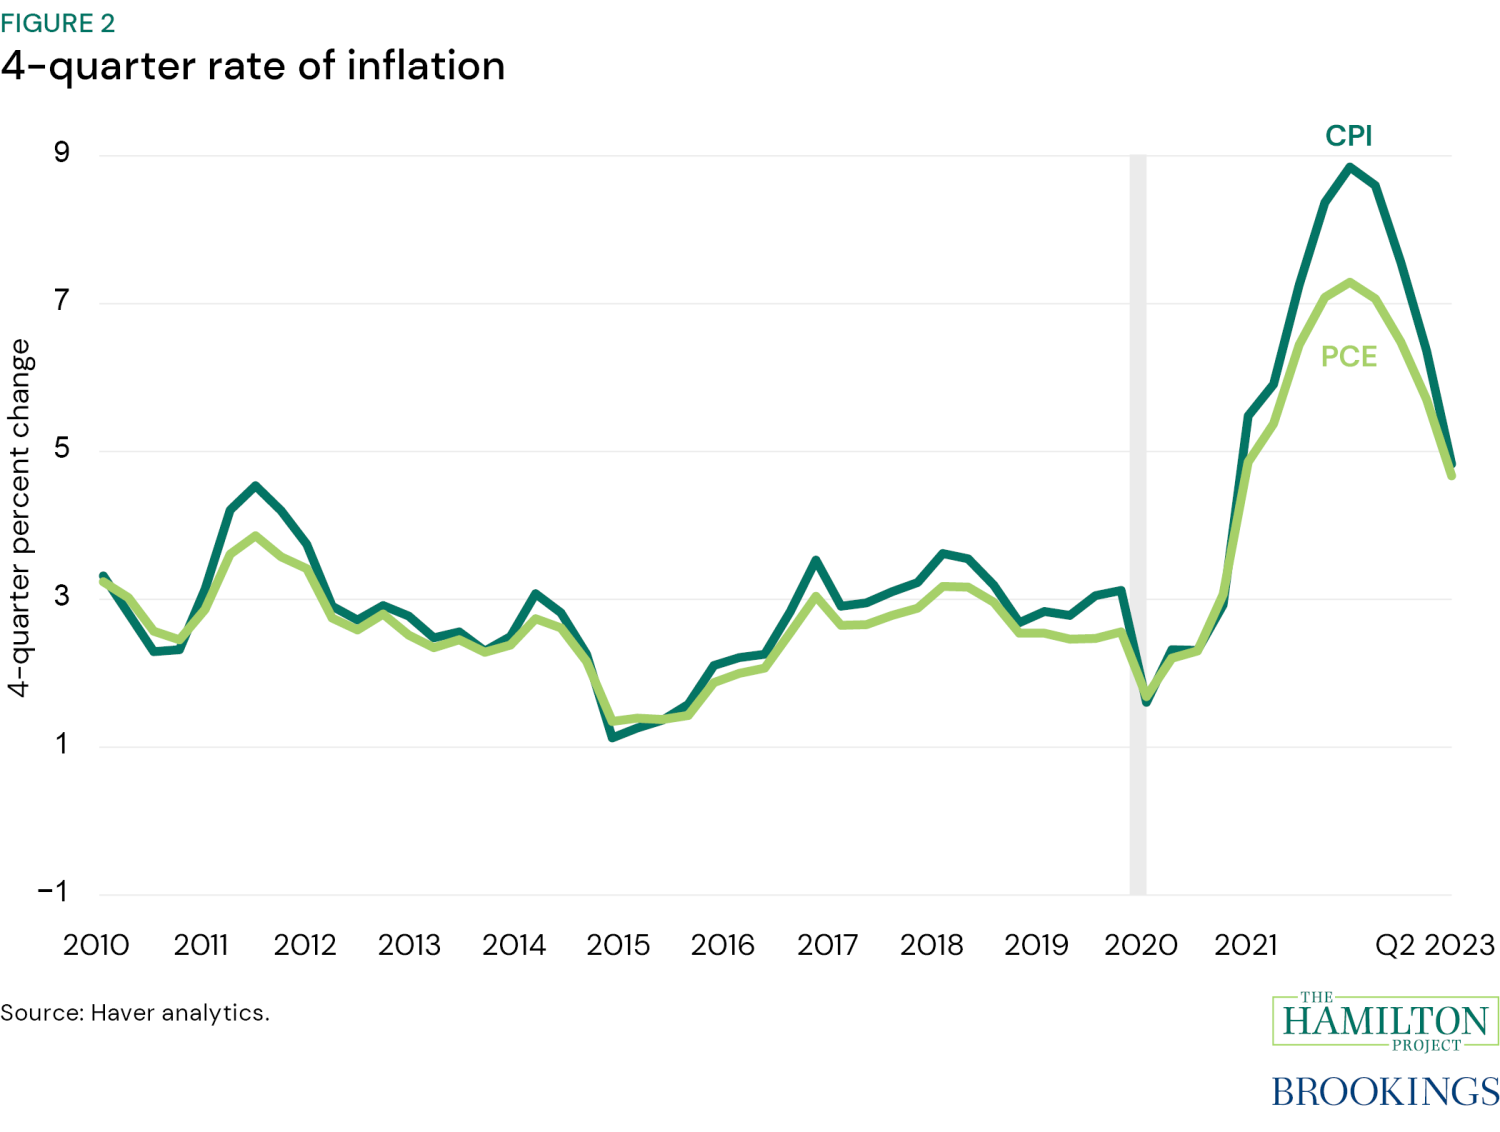 Figure 2: 4-quarter rate of inflation comparing CPI to PCE